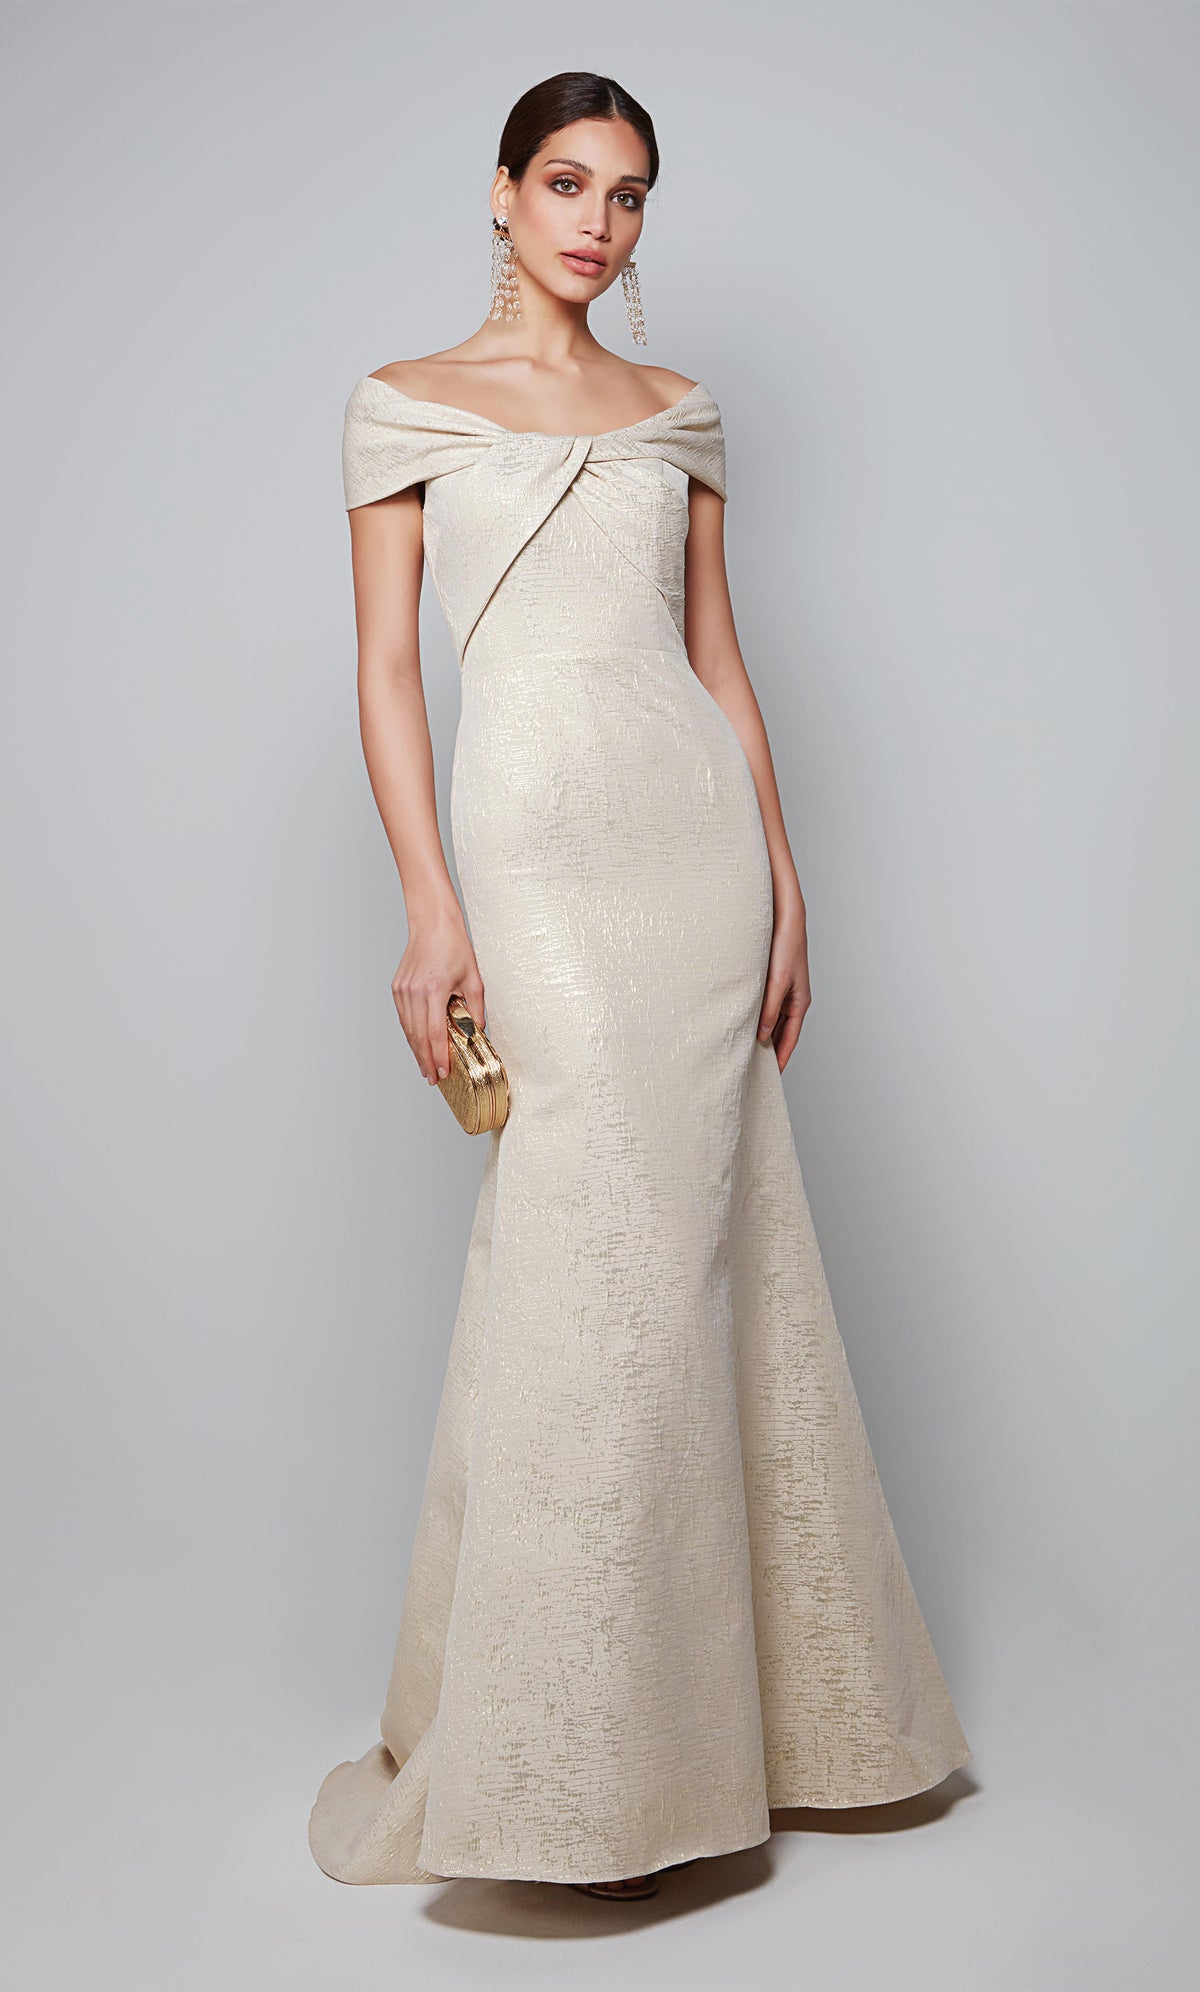 Elegant wedding guest dress with a bateau neckline and fit and flare silhouette in champagne-gold.